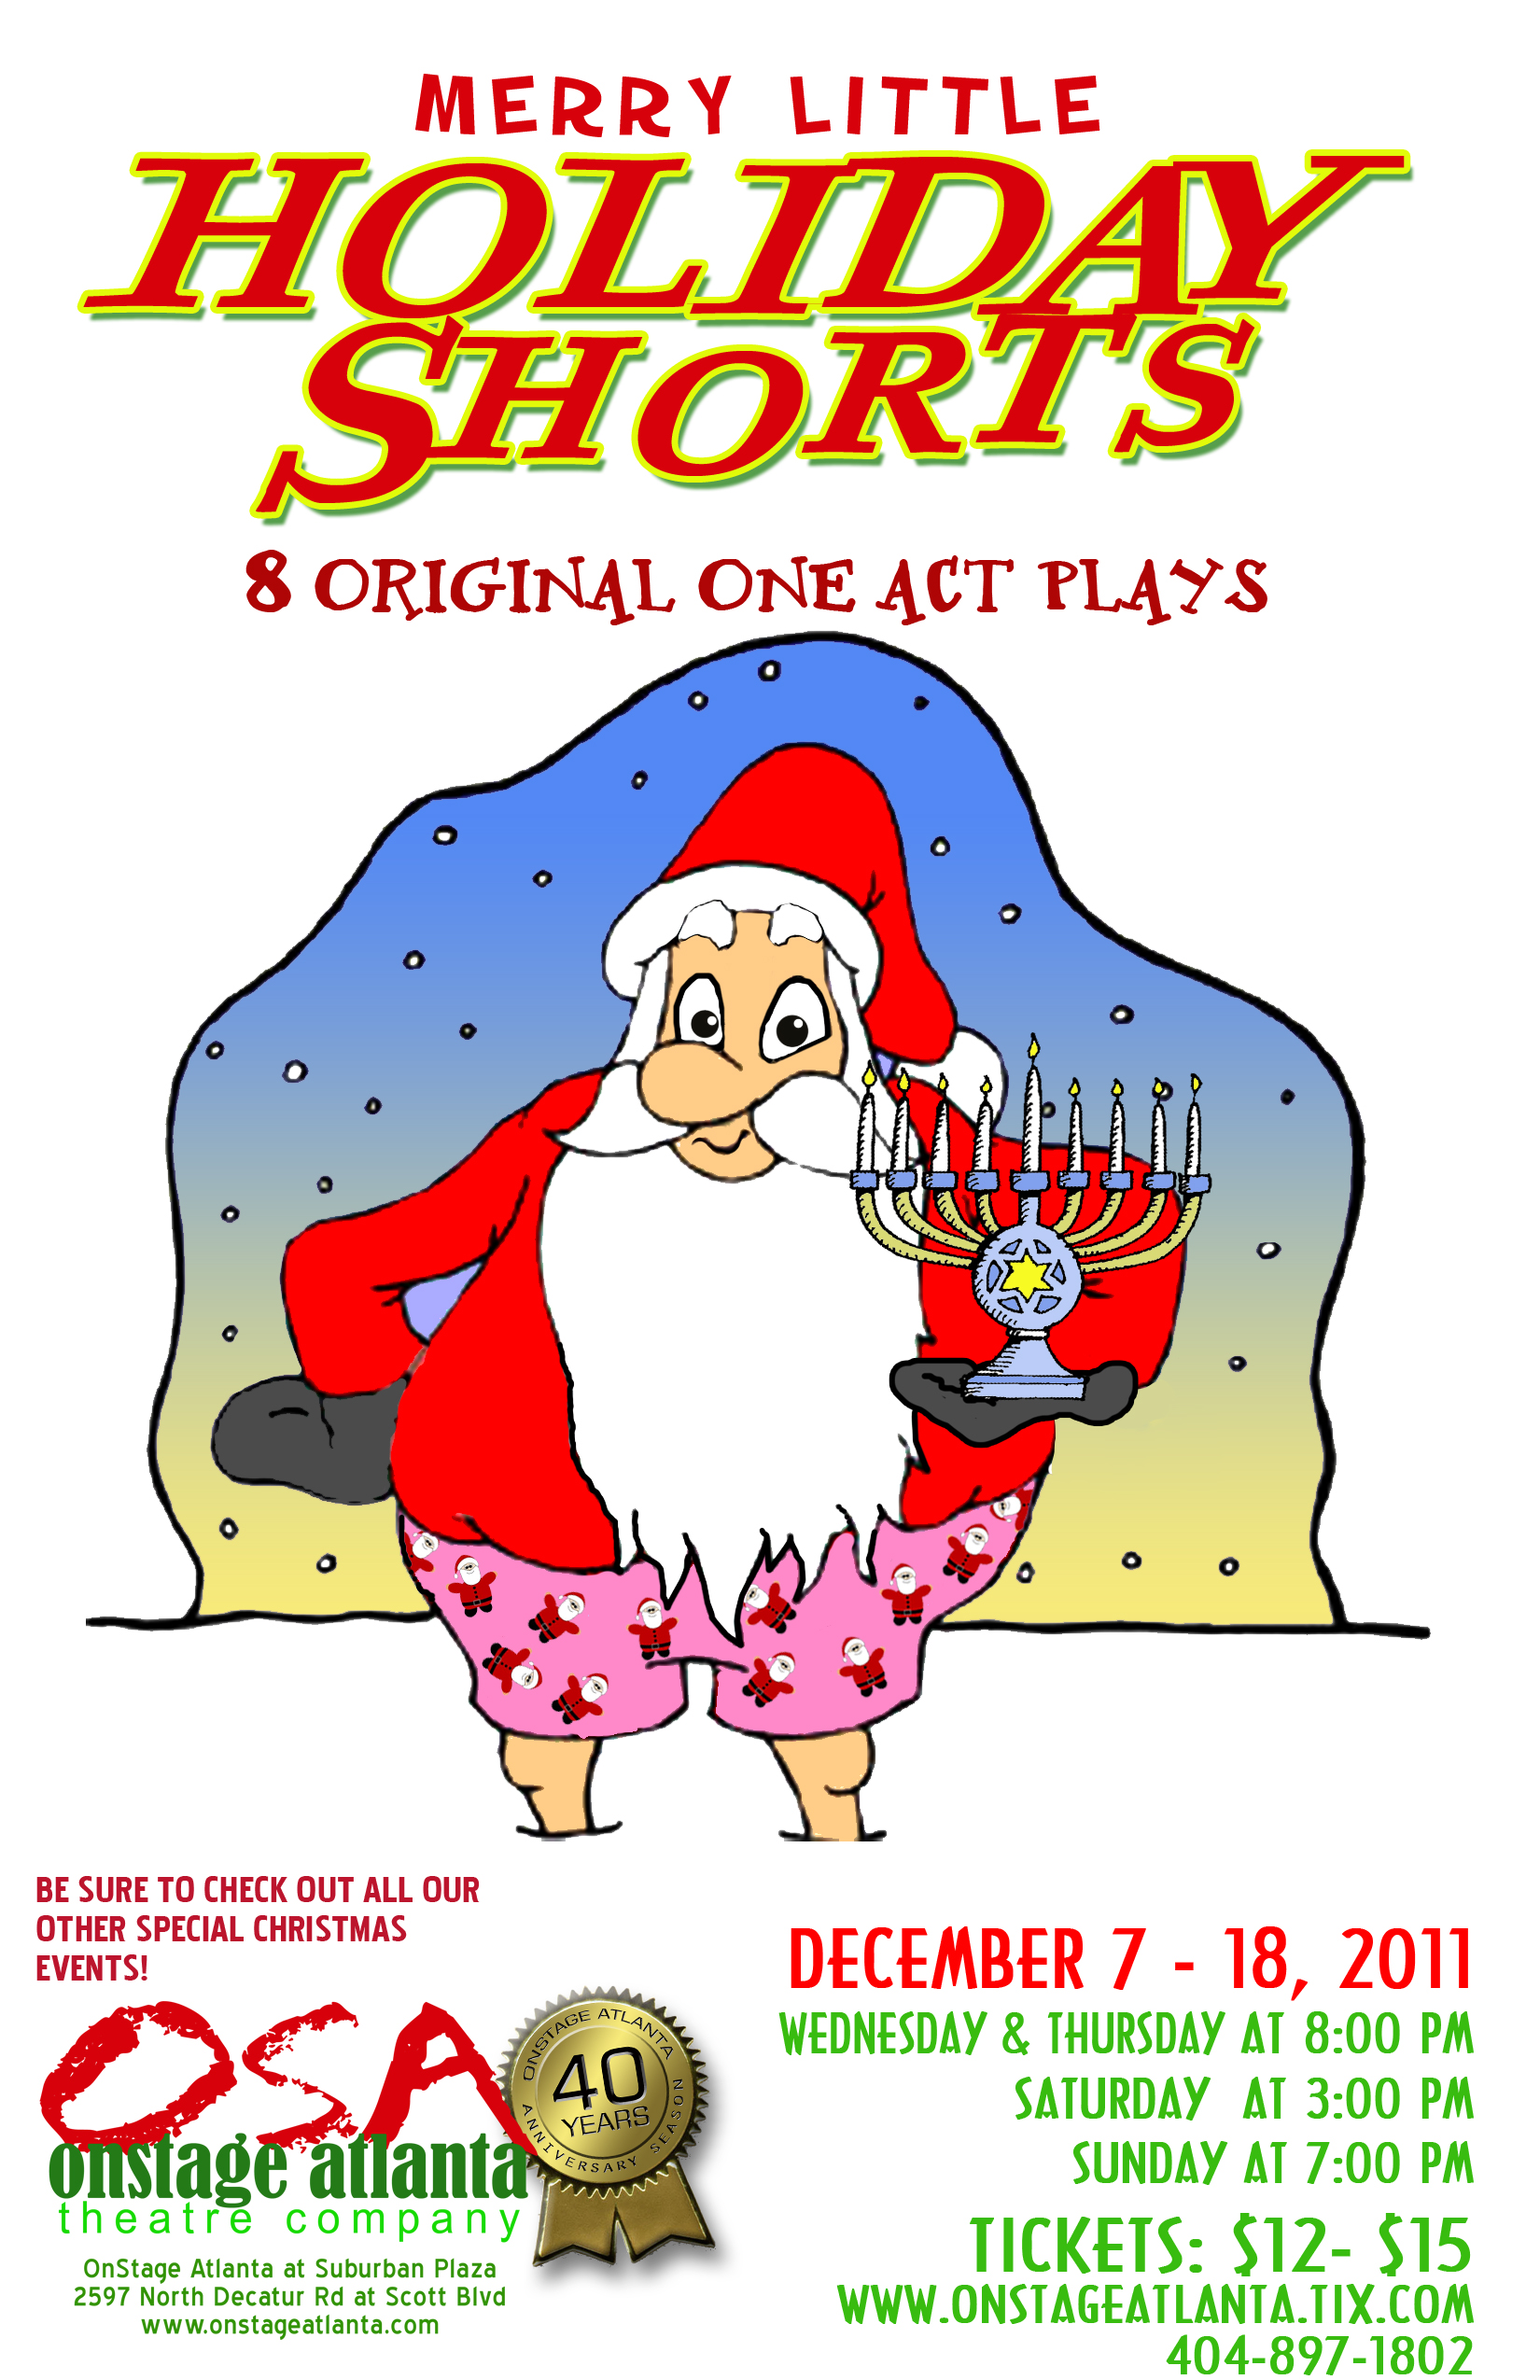 Onstage Atlanta's Merry Little Holiday Shorts, featuring two plays by Daniel Guyton